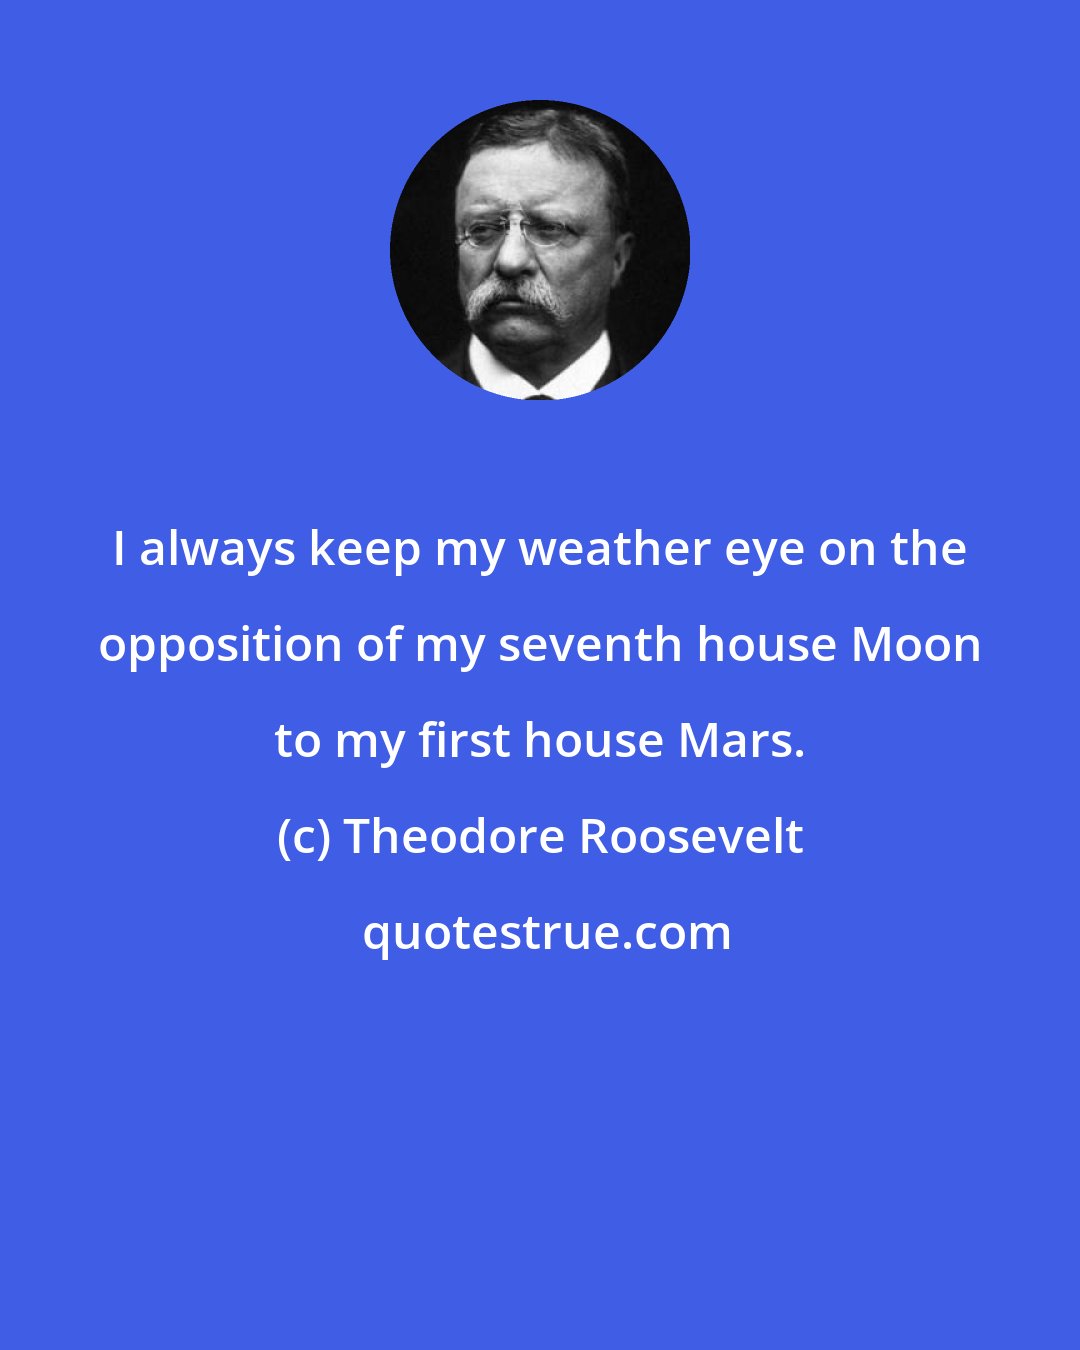 Theodore Roosevelt: I always keep my weather eye on the opposition of my seventh house Moon to my first house Mars.